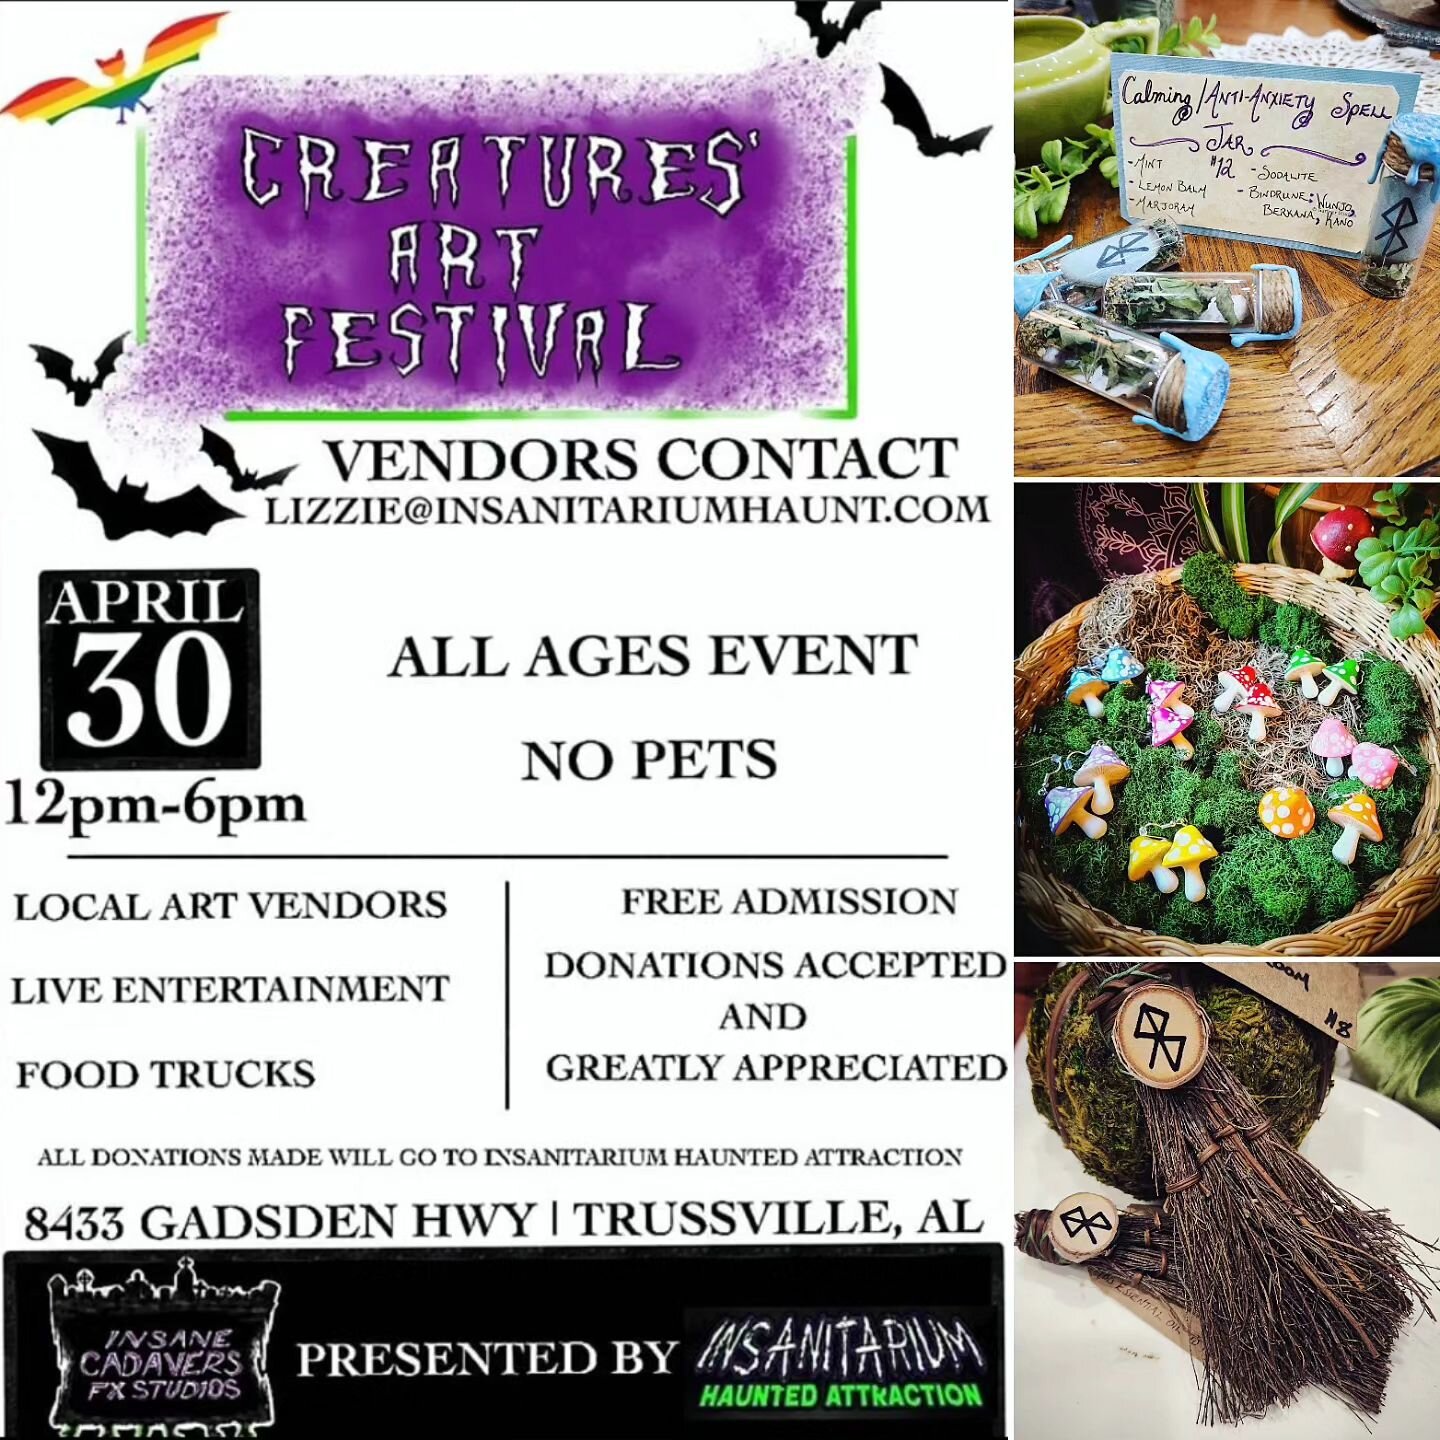 Can't wait to see everyone tomorrow on what's shaping up to be a BEAUTIFUL day!!!!☀️

#thecelestialcaravan #insanitarium #insanitariumhauntedattraction #artfestival #artshow #handmade #handcrafted #supportsmallbusiness #supportlocal #supportlocalarti